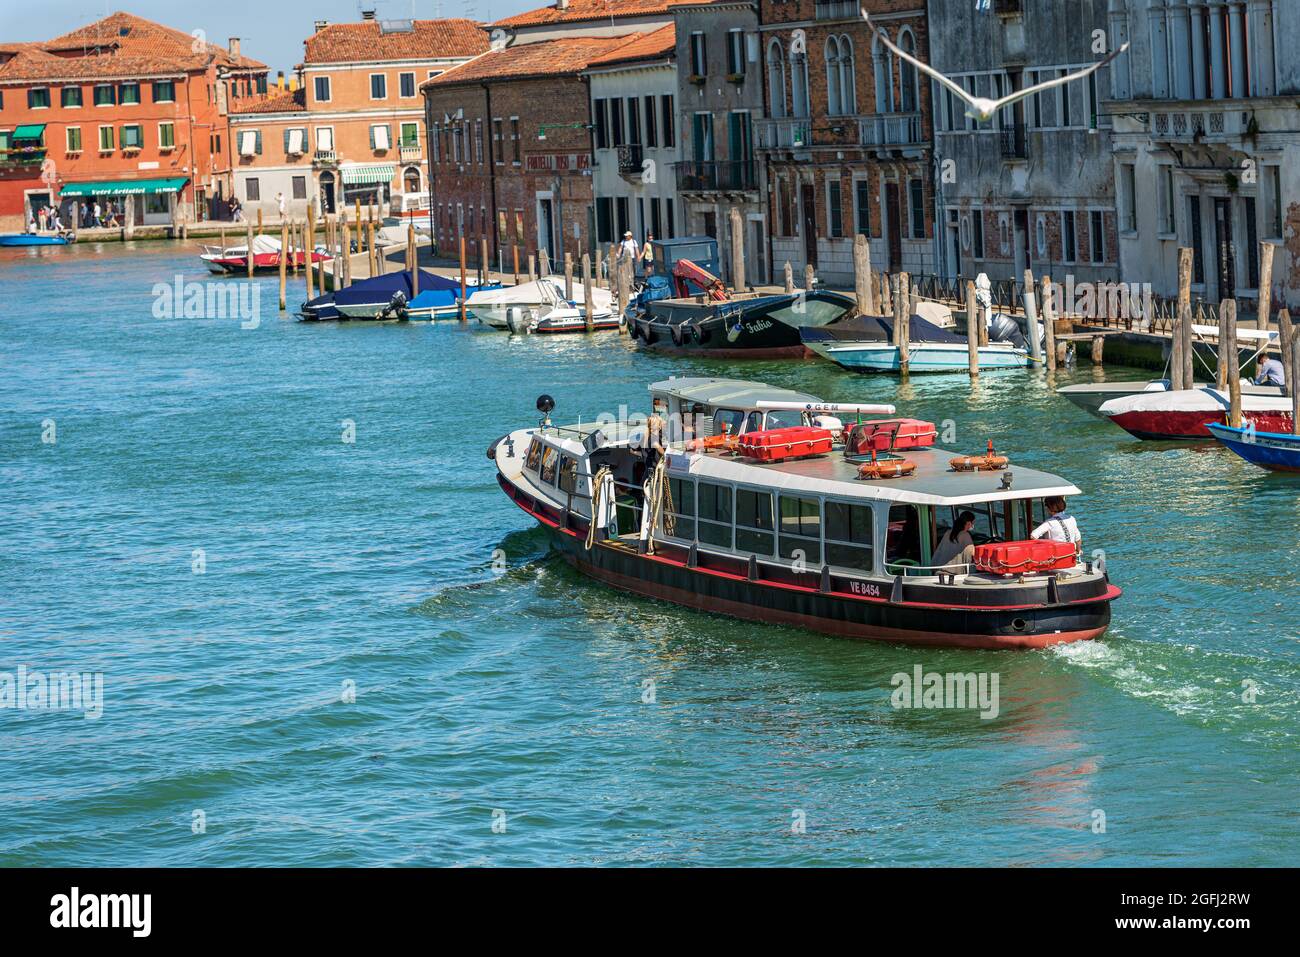 Actv (municipal company for public transport) Ferry Boat or Vaporetto with tourists in motion in a canal of the Murano island, Venice, Italy. Stock Photo